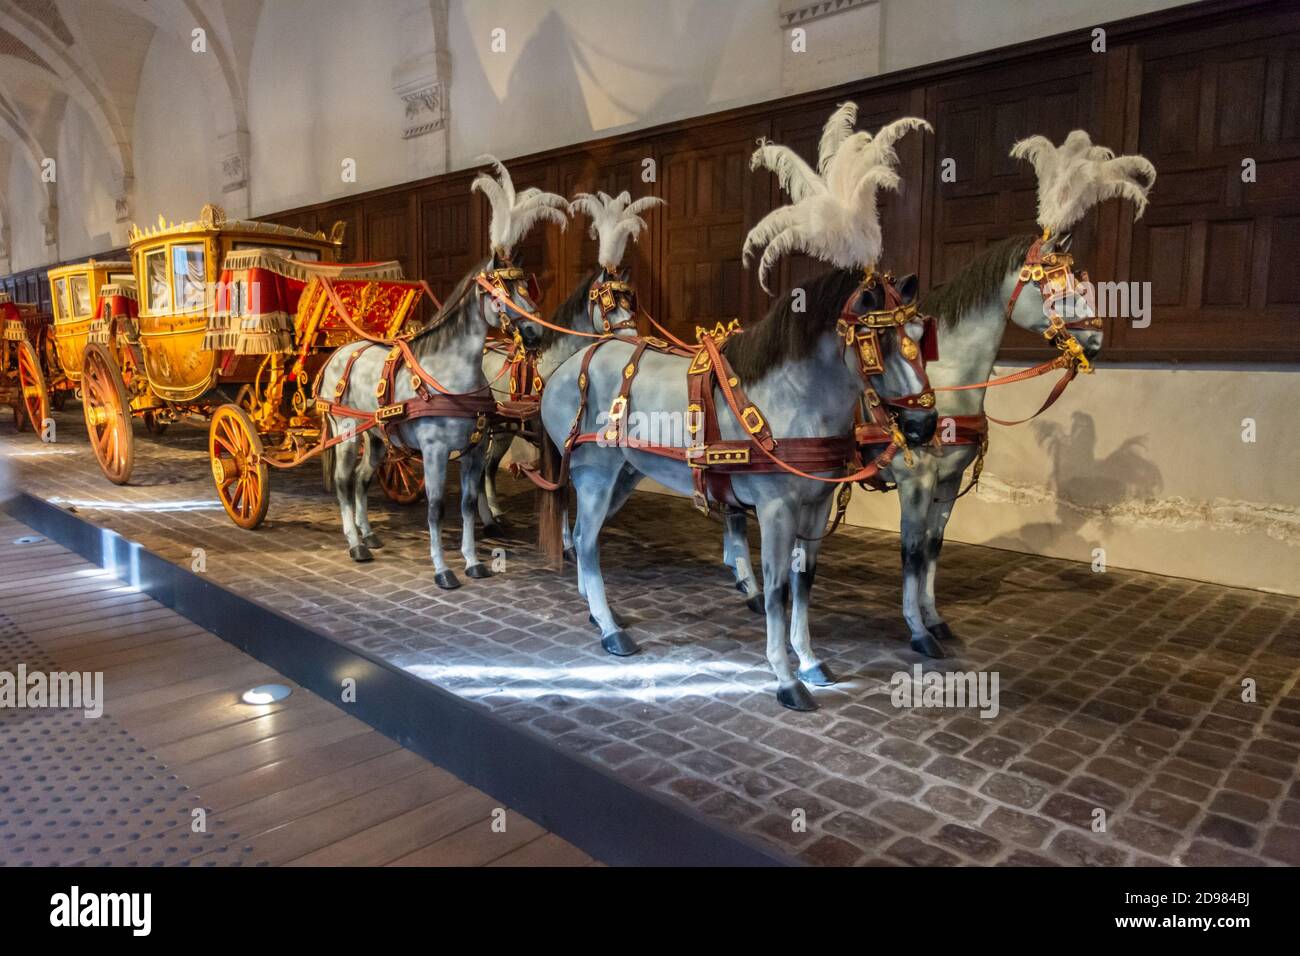 Versailles, France - August 28, 2019 : Gallery of Coaches is a free museum located next to the Castle of Versailles, with lots of old carriages to see Stock Photo